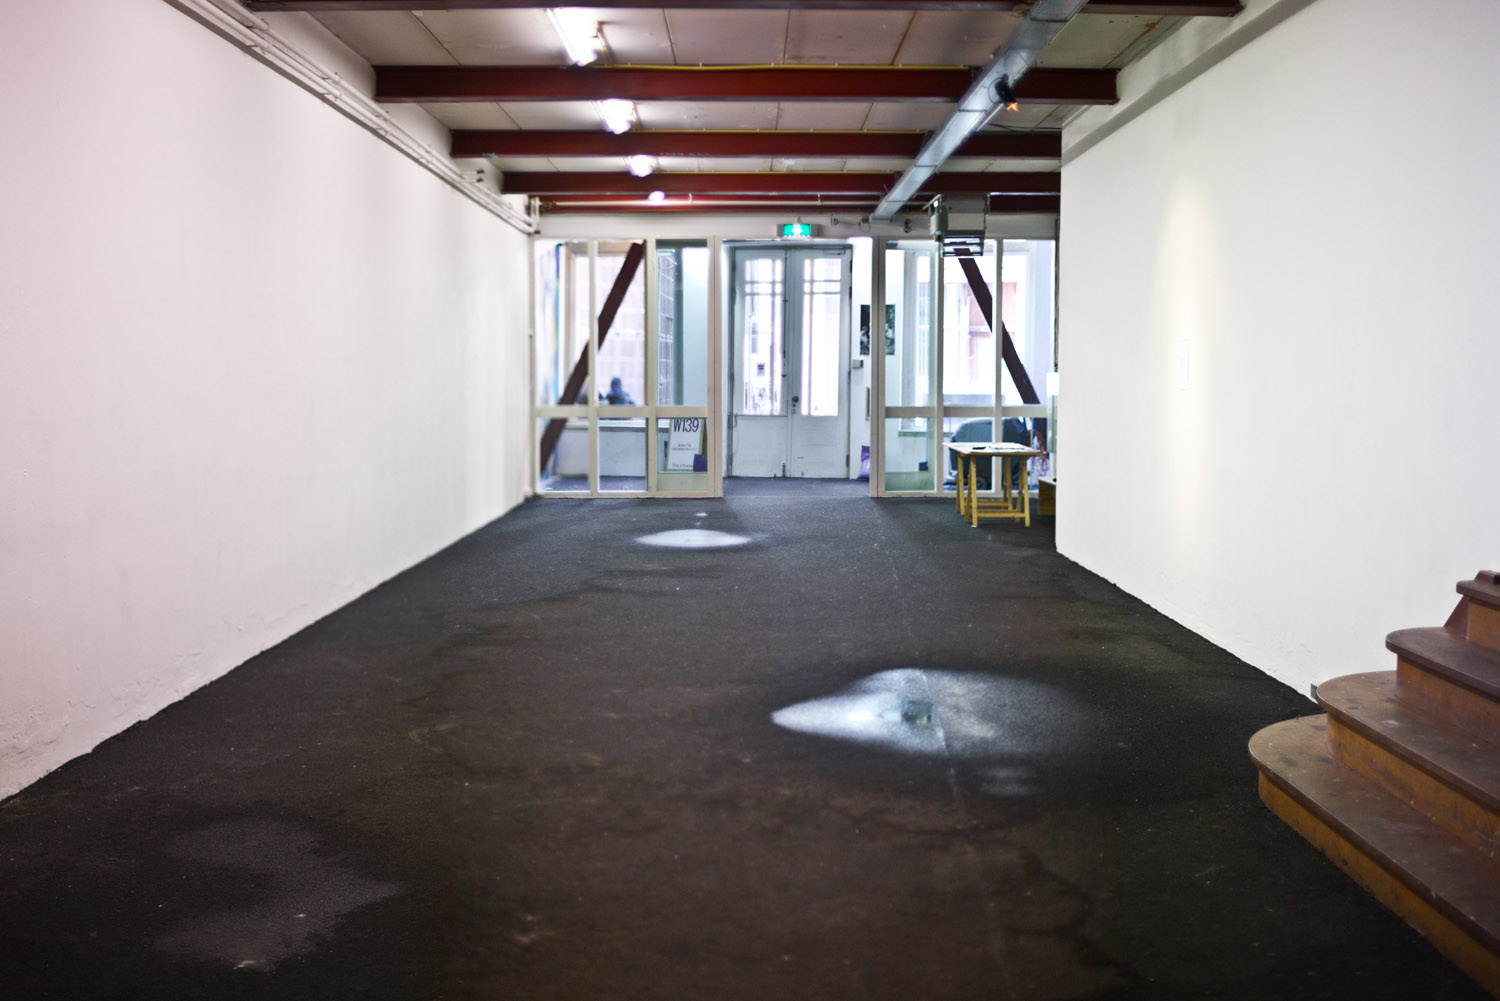 This is Not a Work, 2011. Pipes, dripping water, puddles. Installation view W139, Amsterdam.